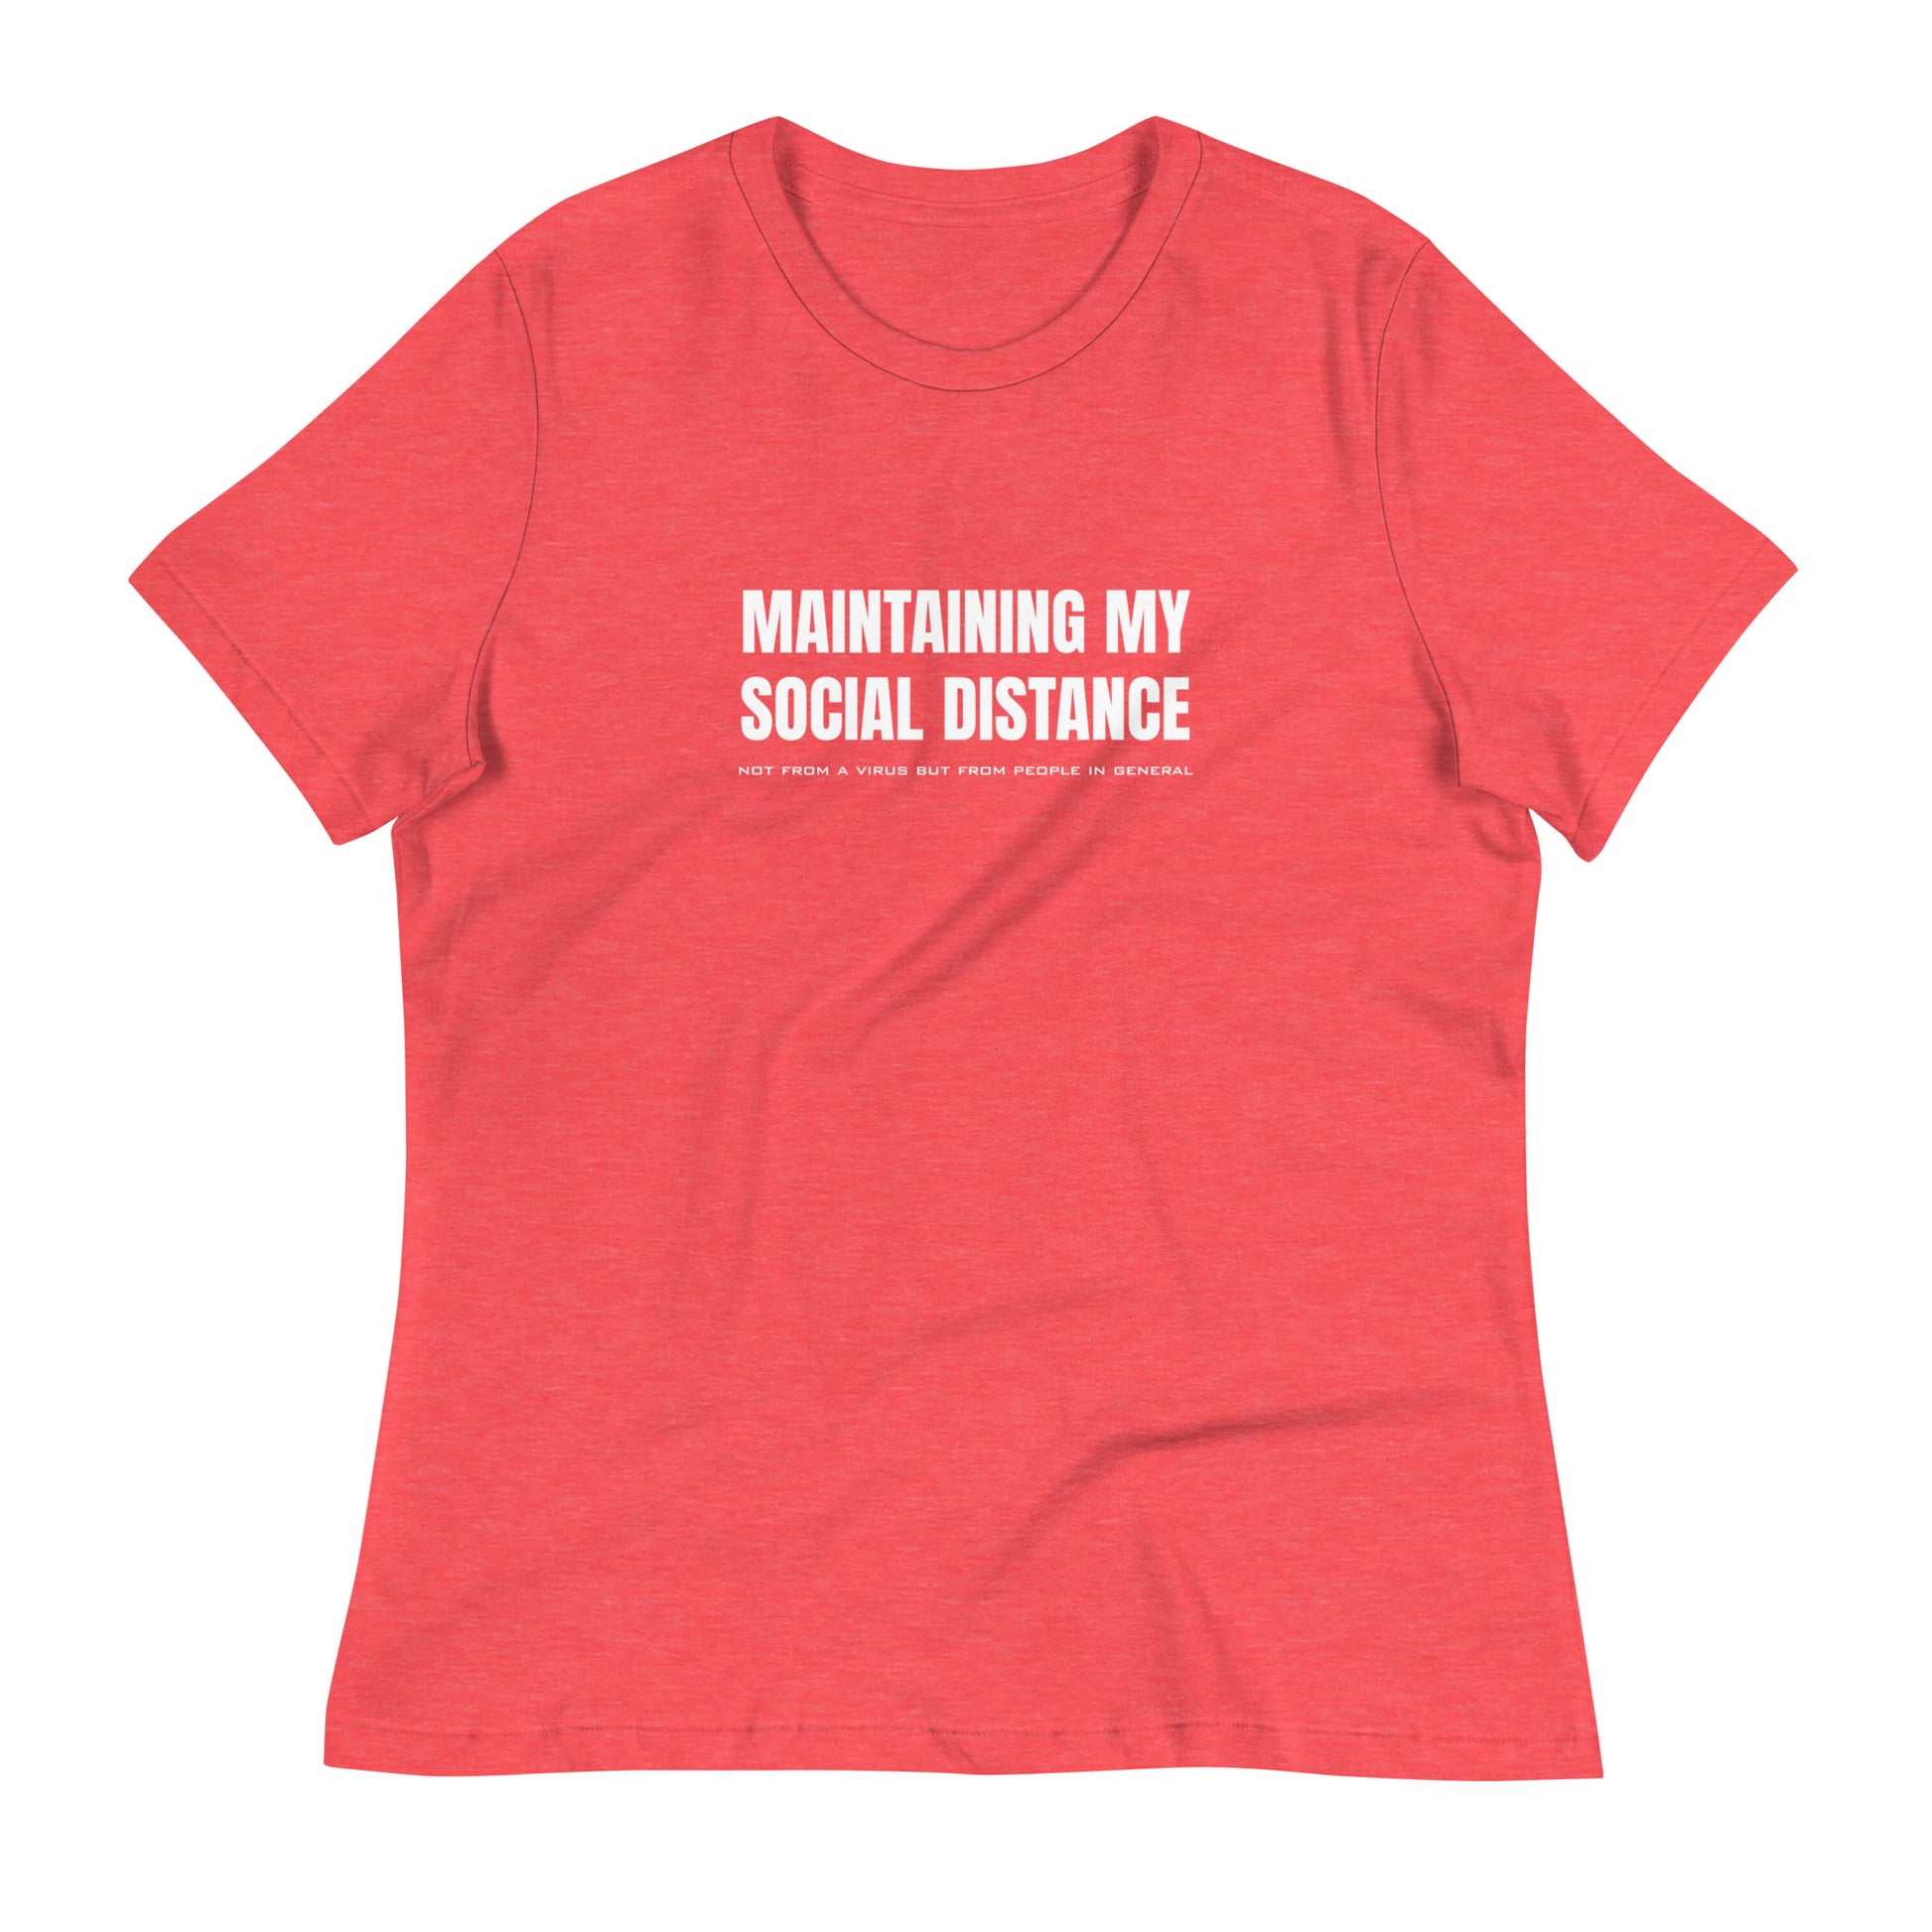 Heather red (coral pink) women's relaxed fit t-shirt with white graphic: "MAINTAINING MY SOCIAL DISTANCE not from a virus but from people in general"